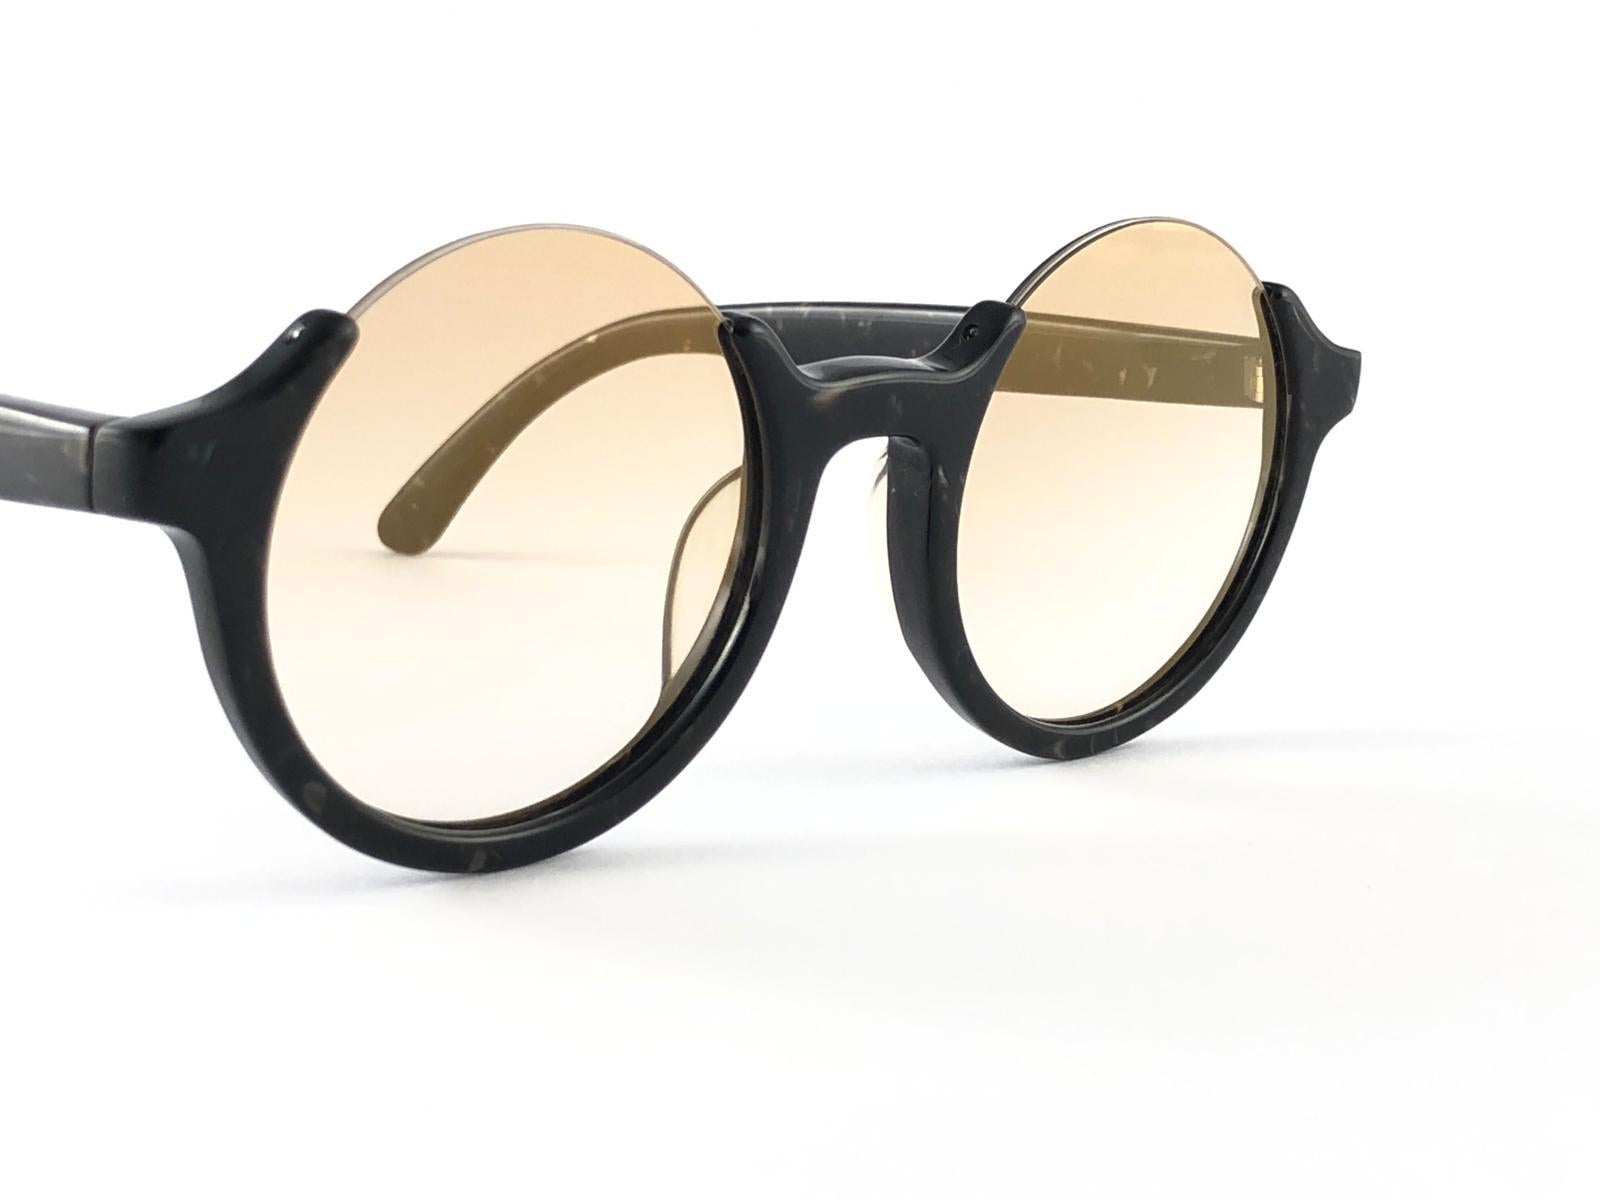 
New Jean Paul Gaultier 56 7061 round black marbled frame. 
Flat lenses that complete a ready to wear JPG look.
Amazing quality and design. A piece of sunglasses history.
This pair has minor sign of wear due to nearly 30 years of storage. 
Design